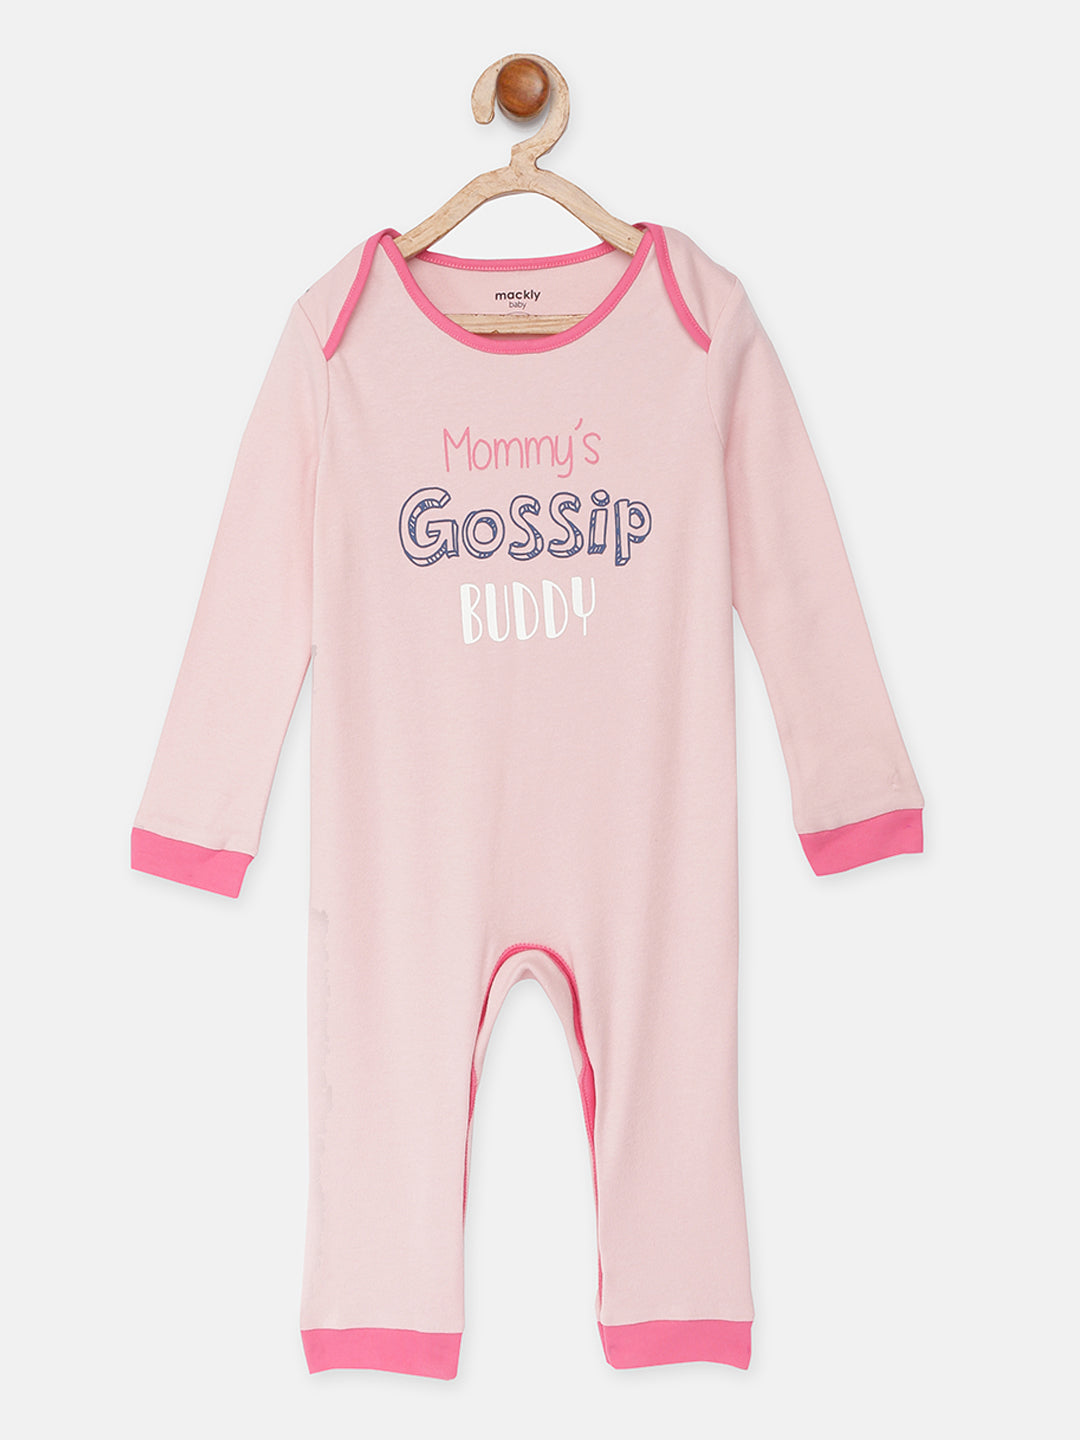 Mommy's Gossip Buddy Printed Rompers - Pack of 2